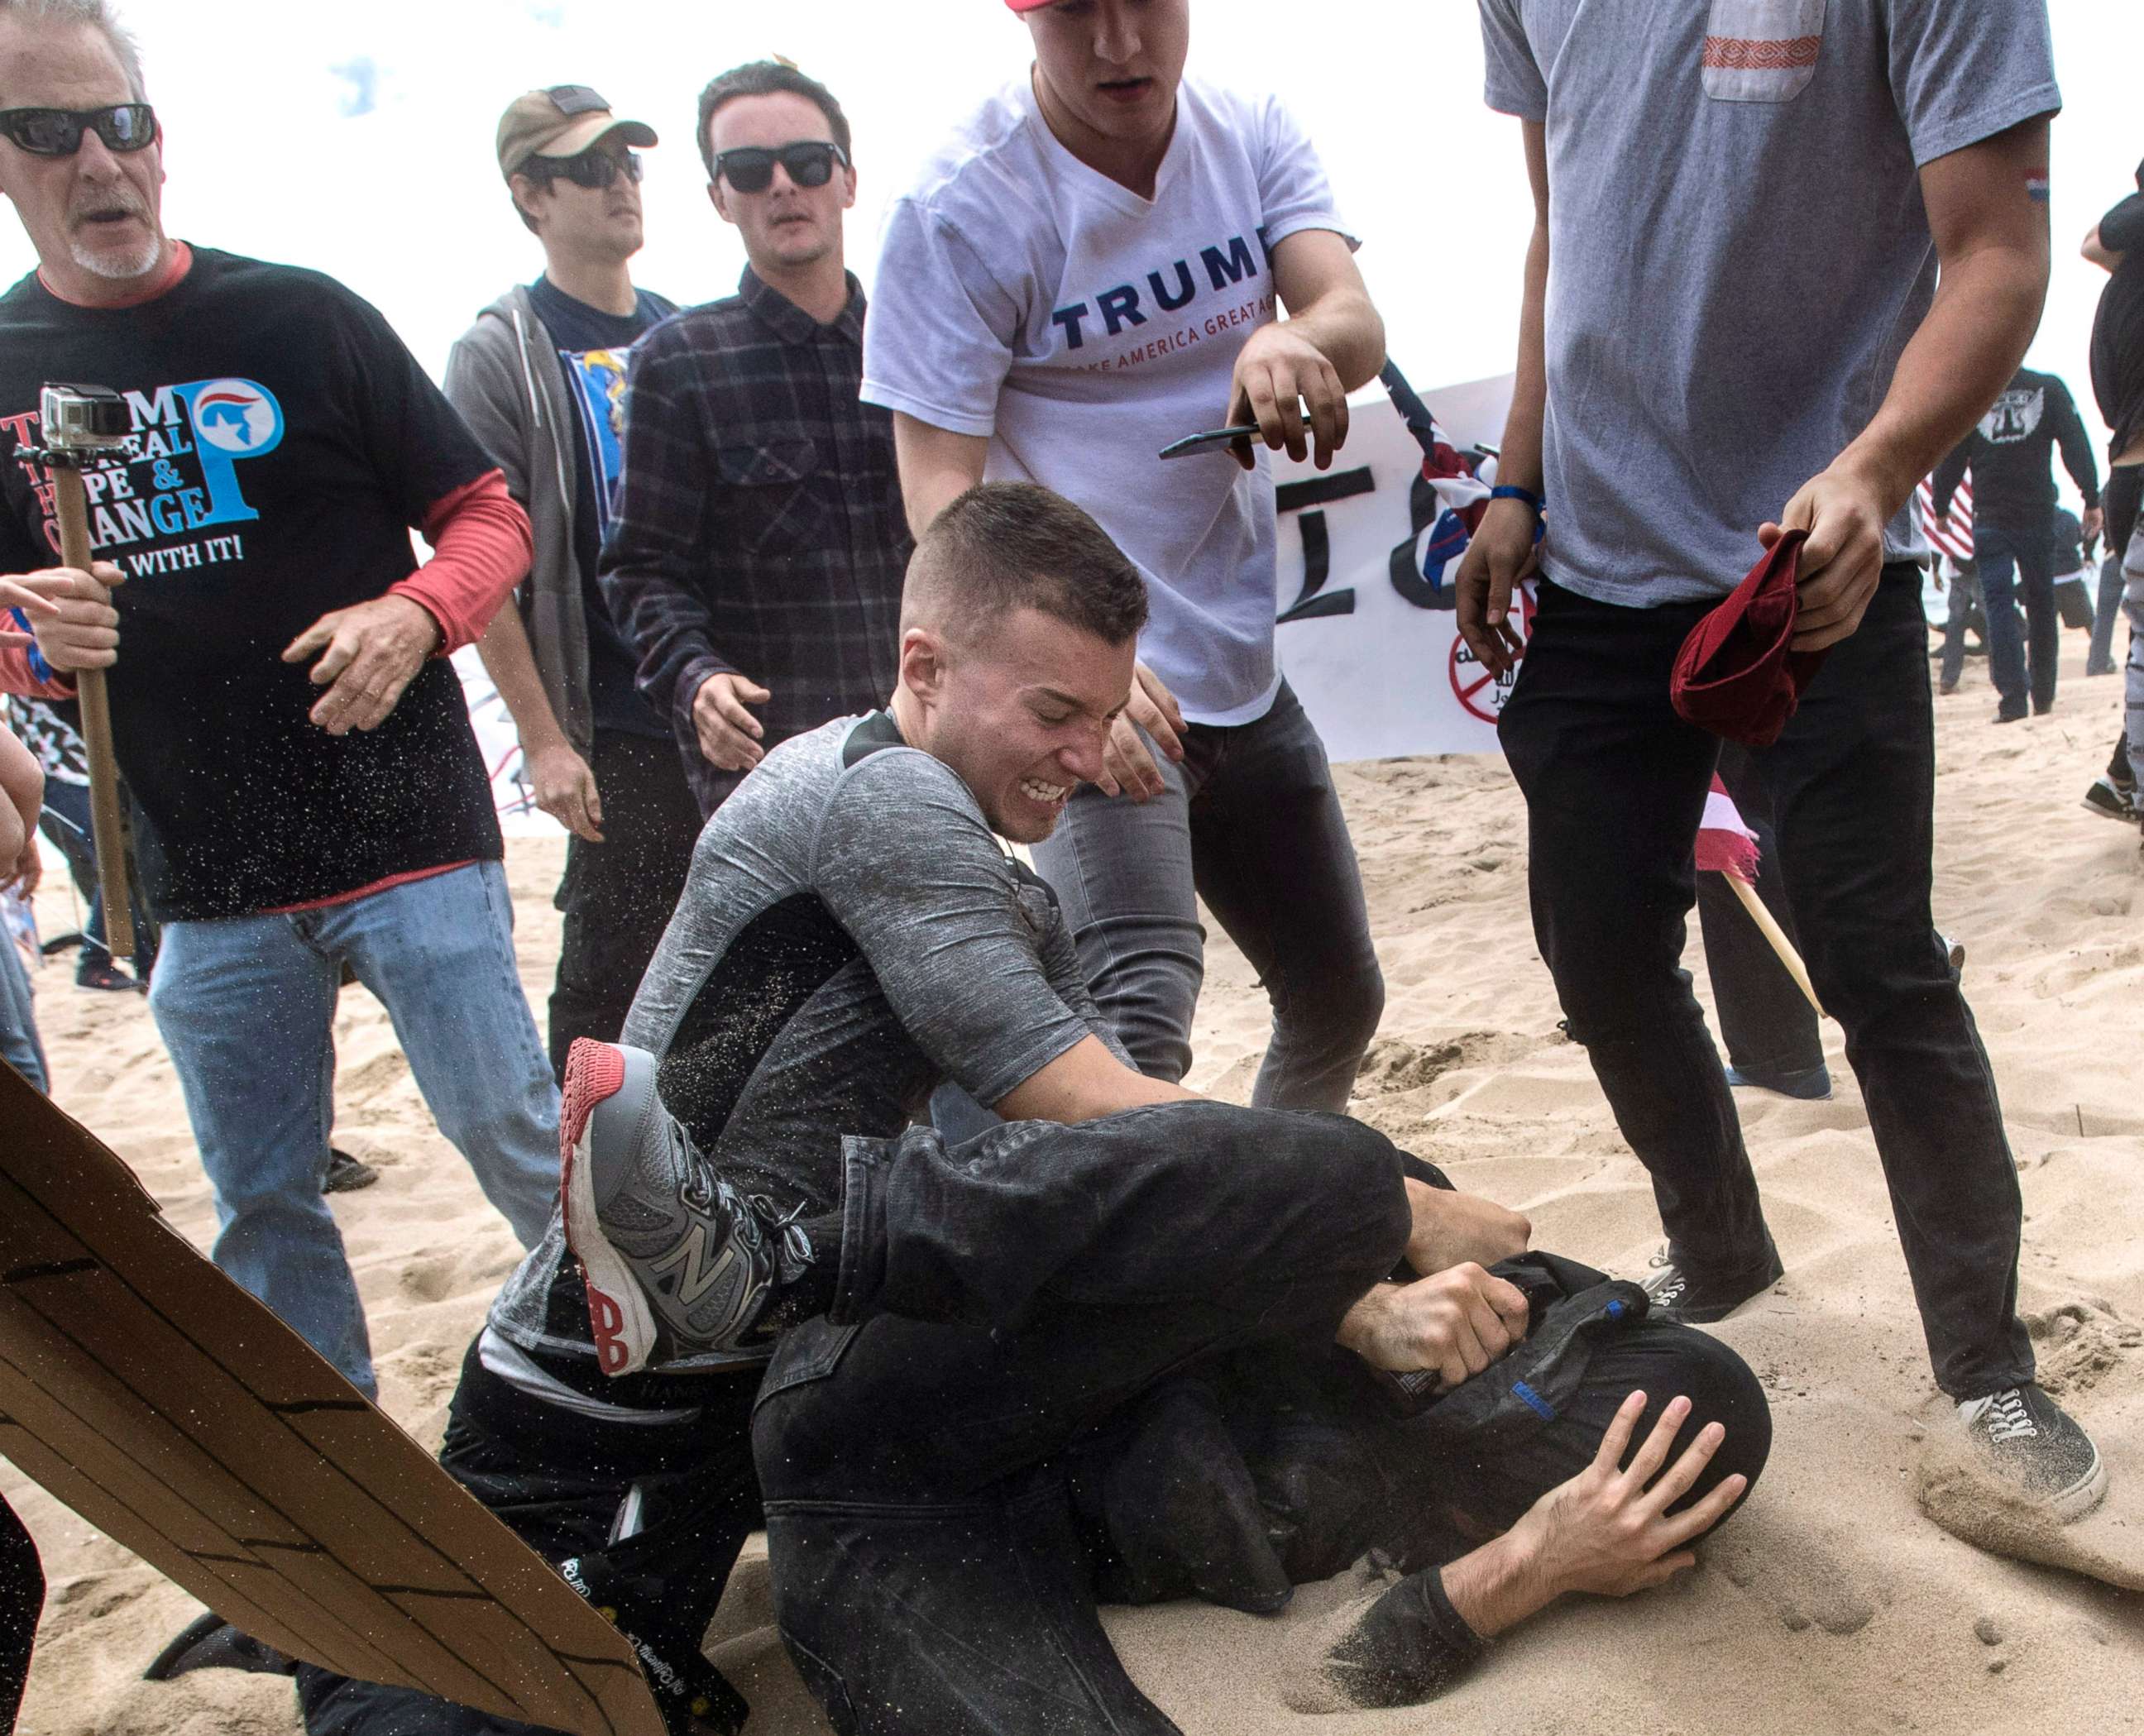 PHOTO: White nationalist Robert Rundo, center, clashes with an anti-Trump protester, bottom center, in Huntington Beach, Calif., March 25, 2017.